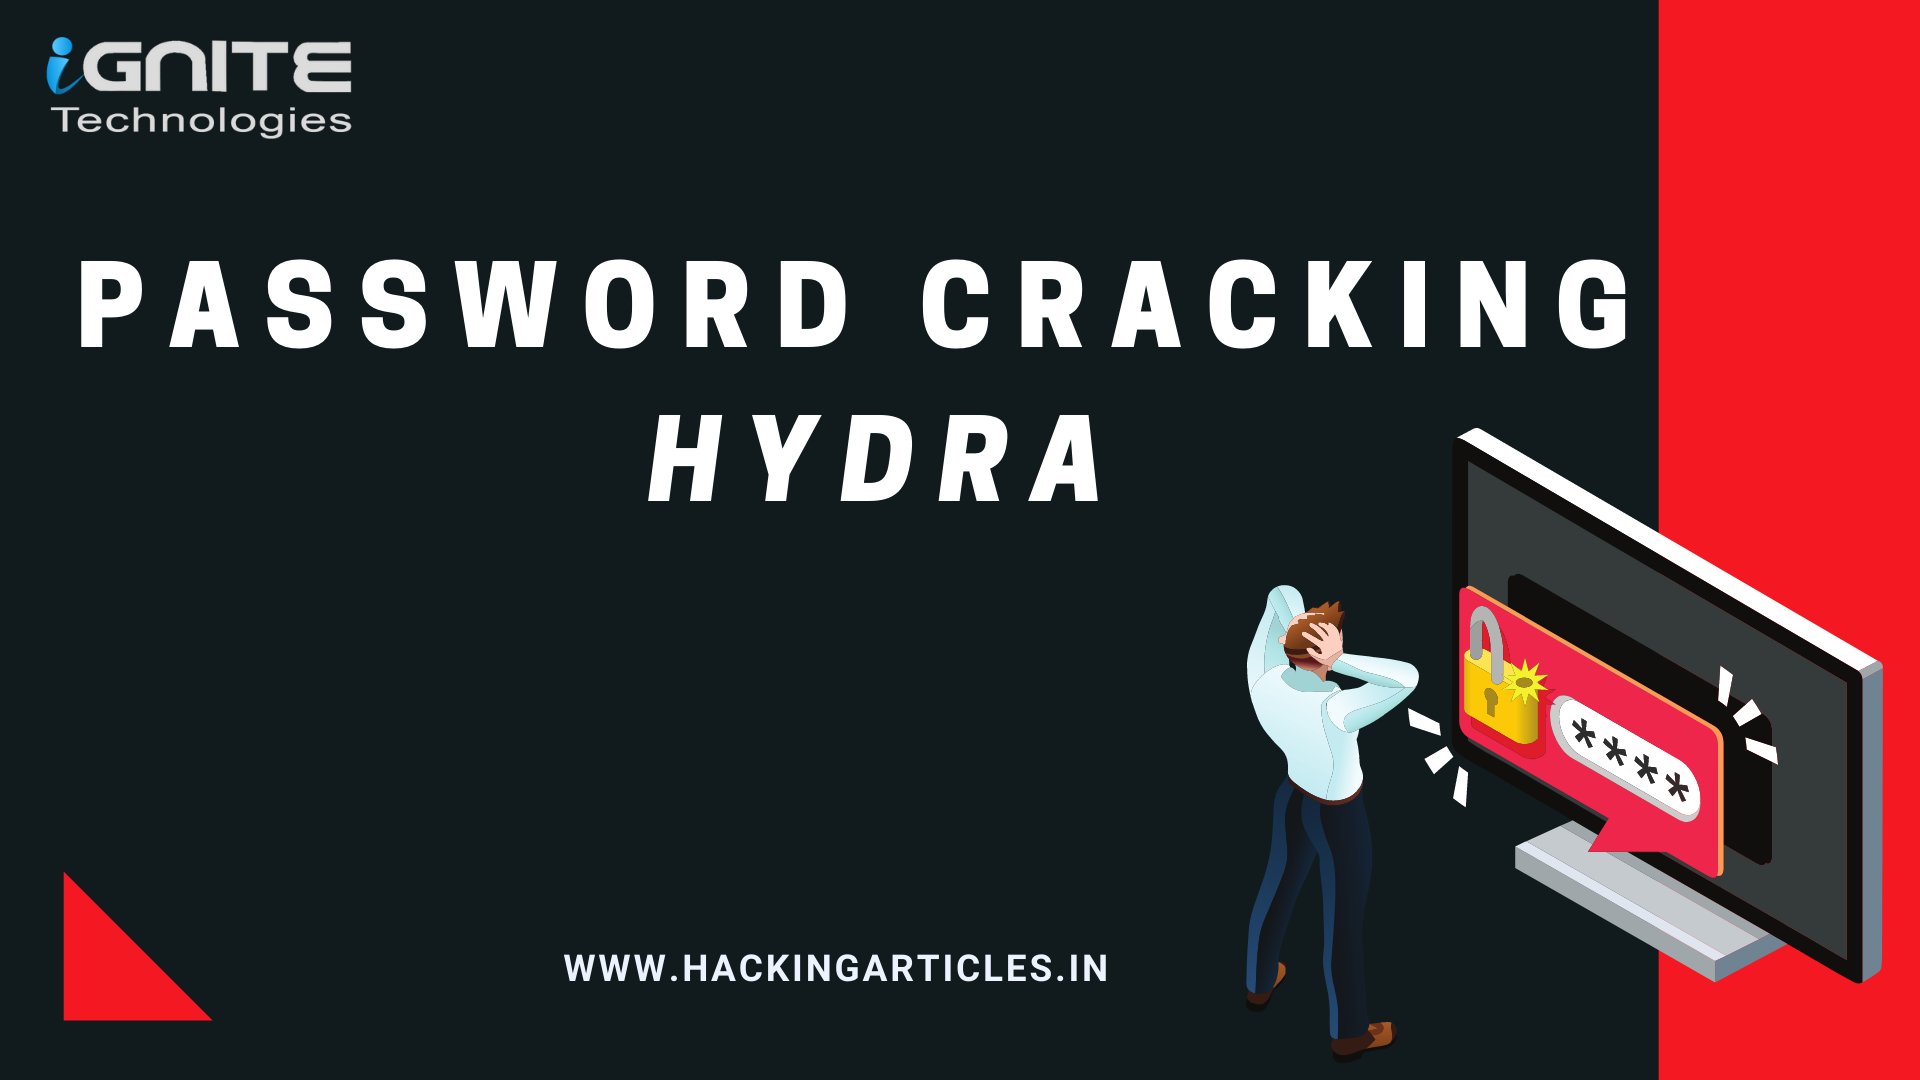 How to use the Hydra password-cracking tool